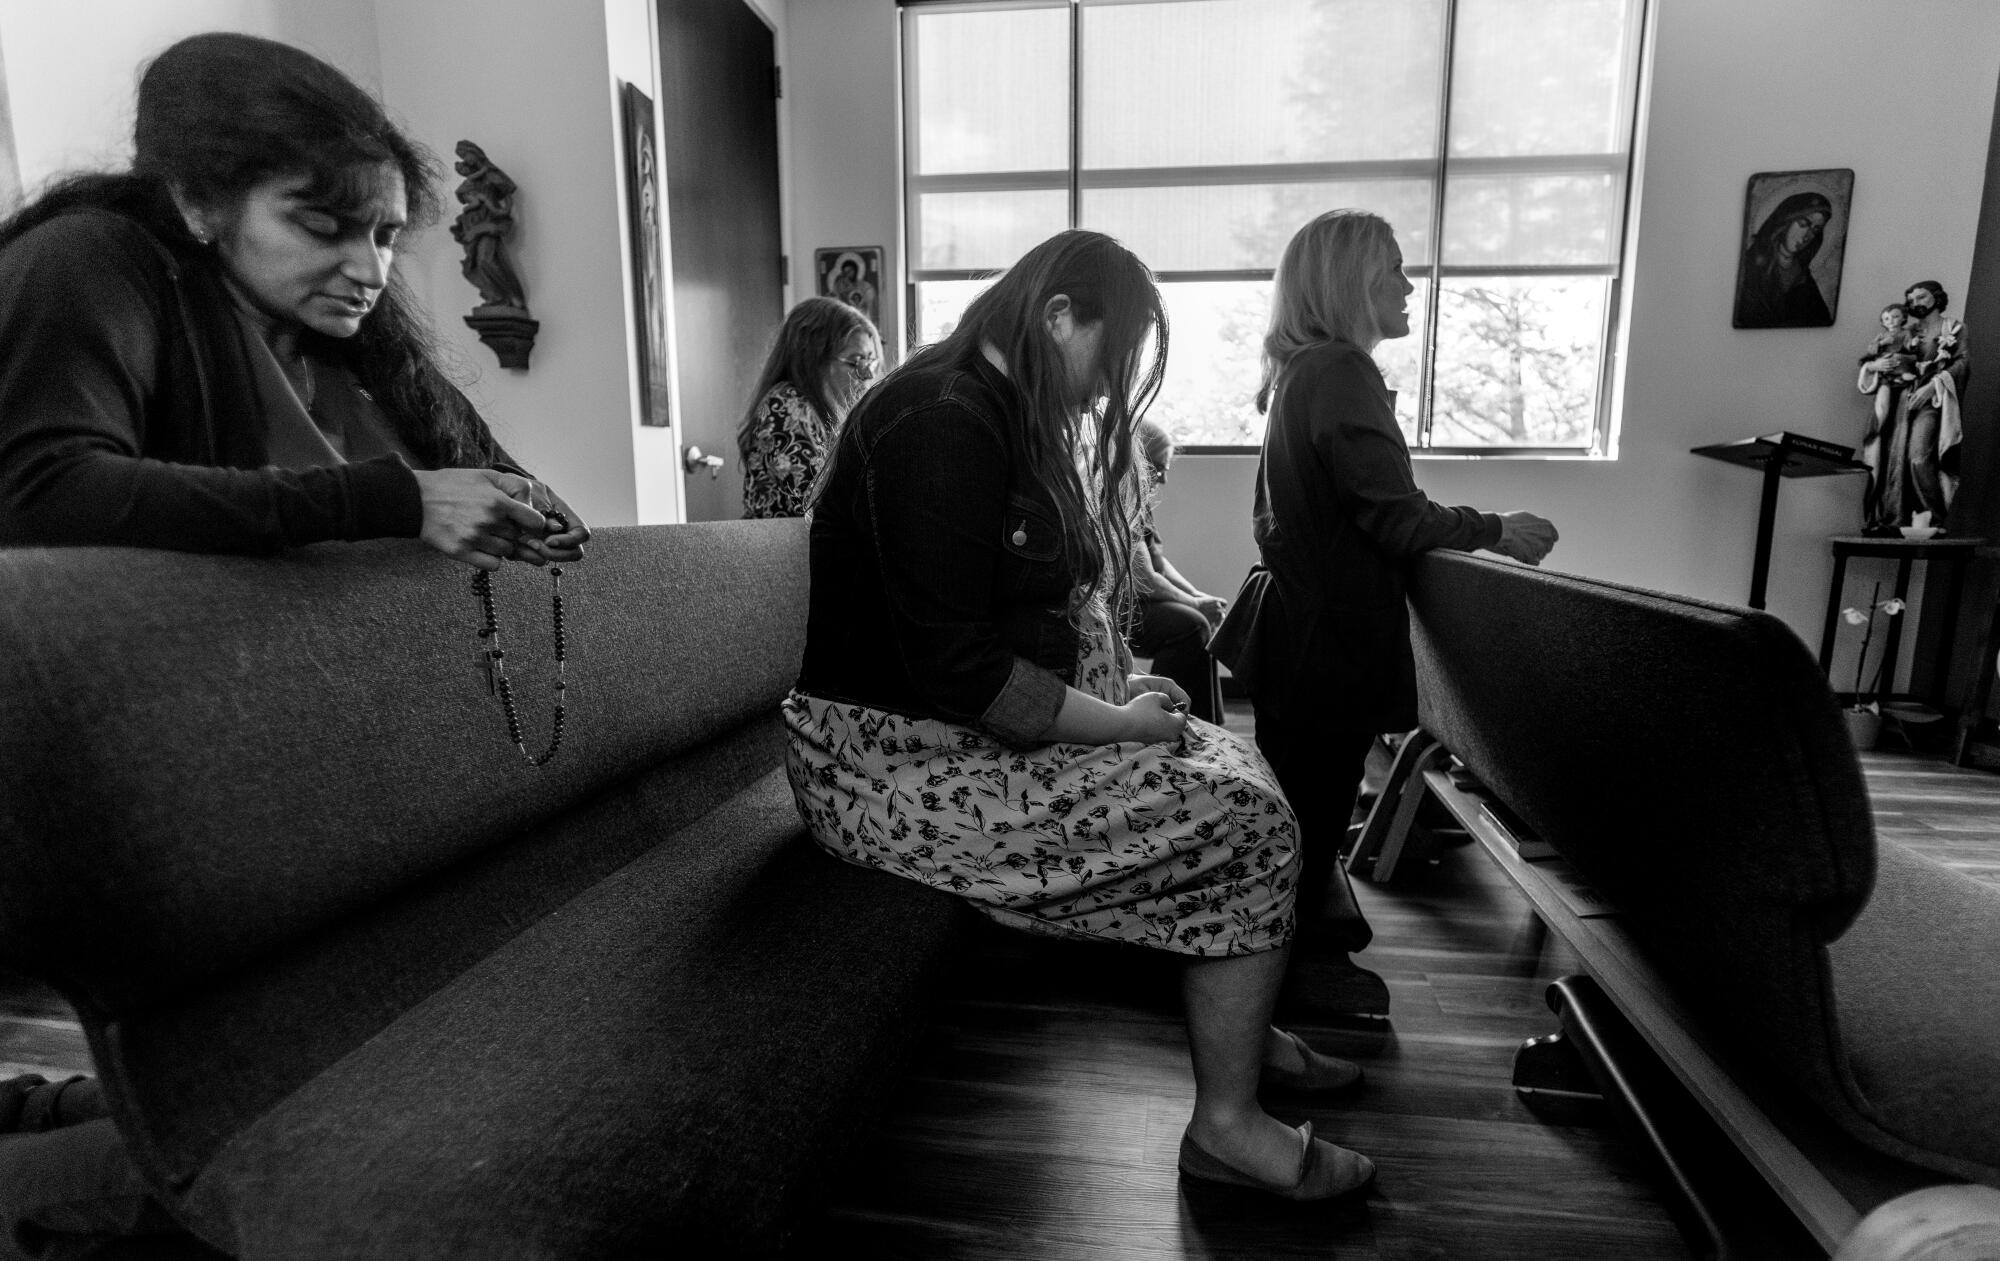 Women sit on pews and kneel to pray in a chapel